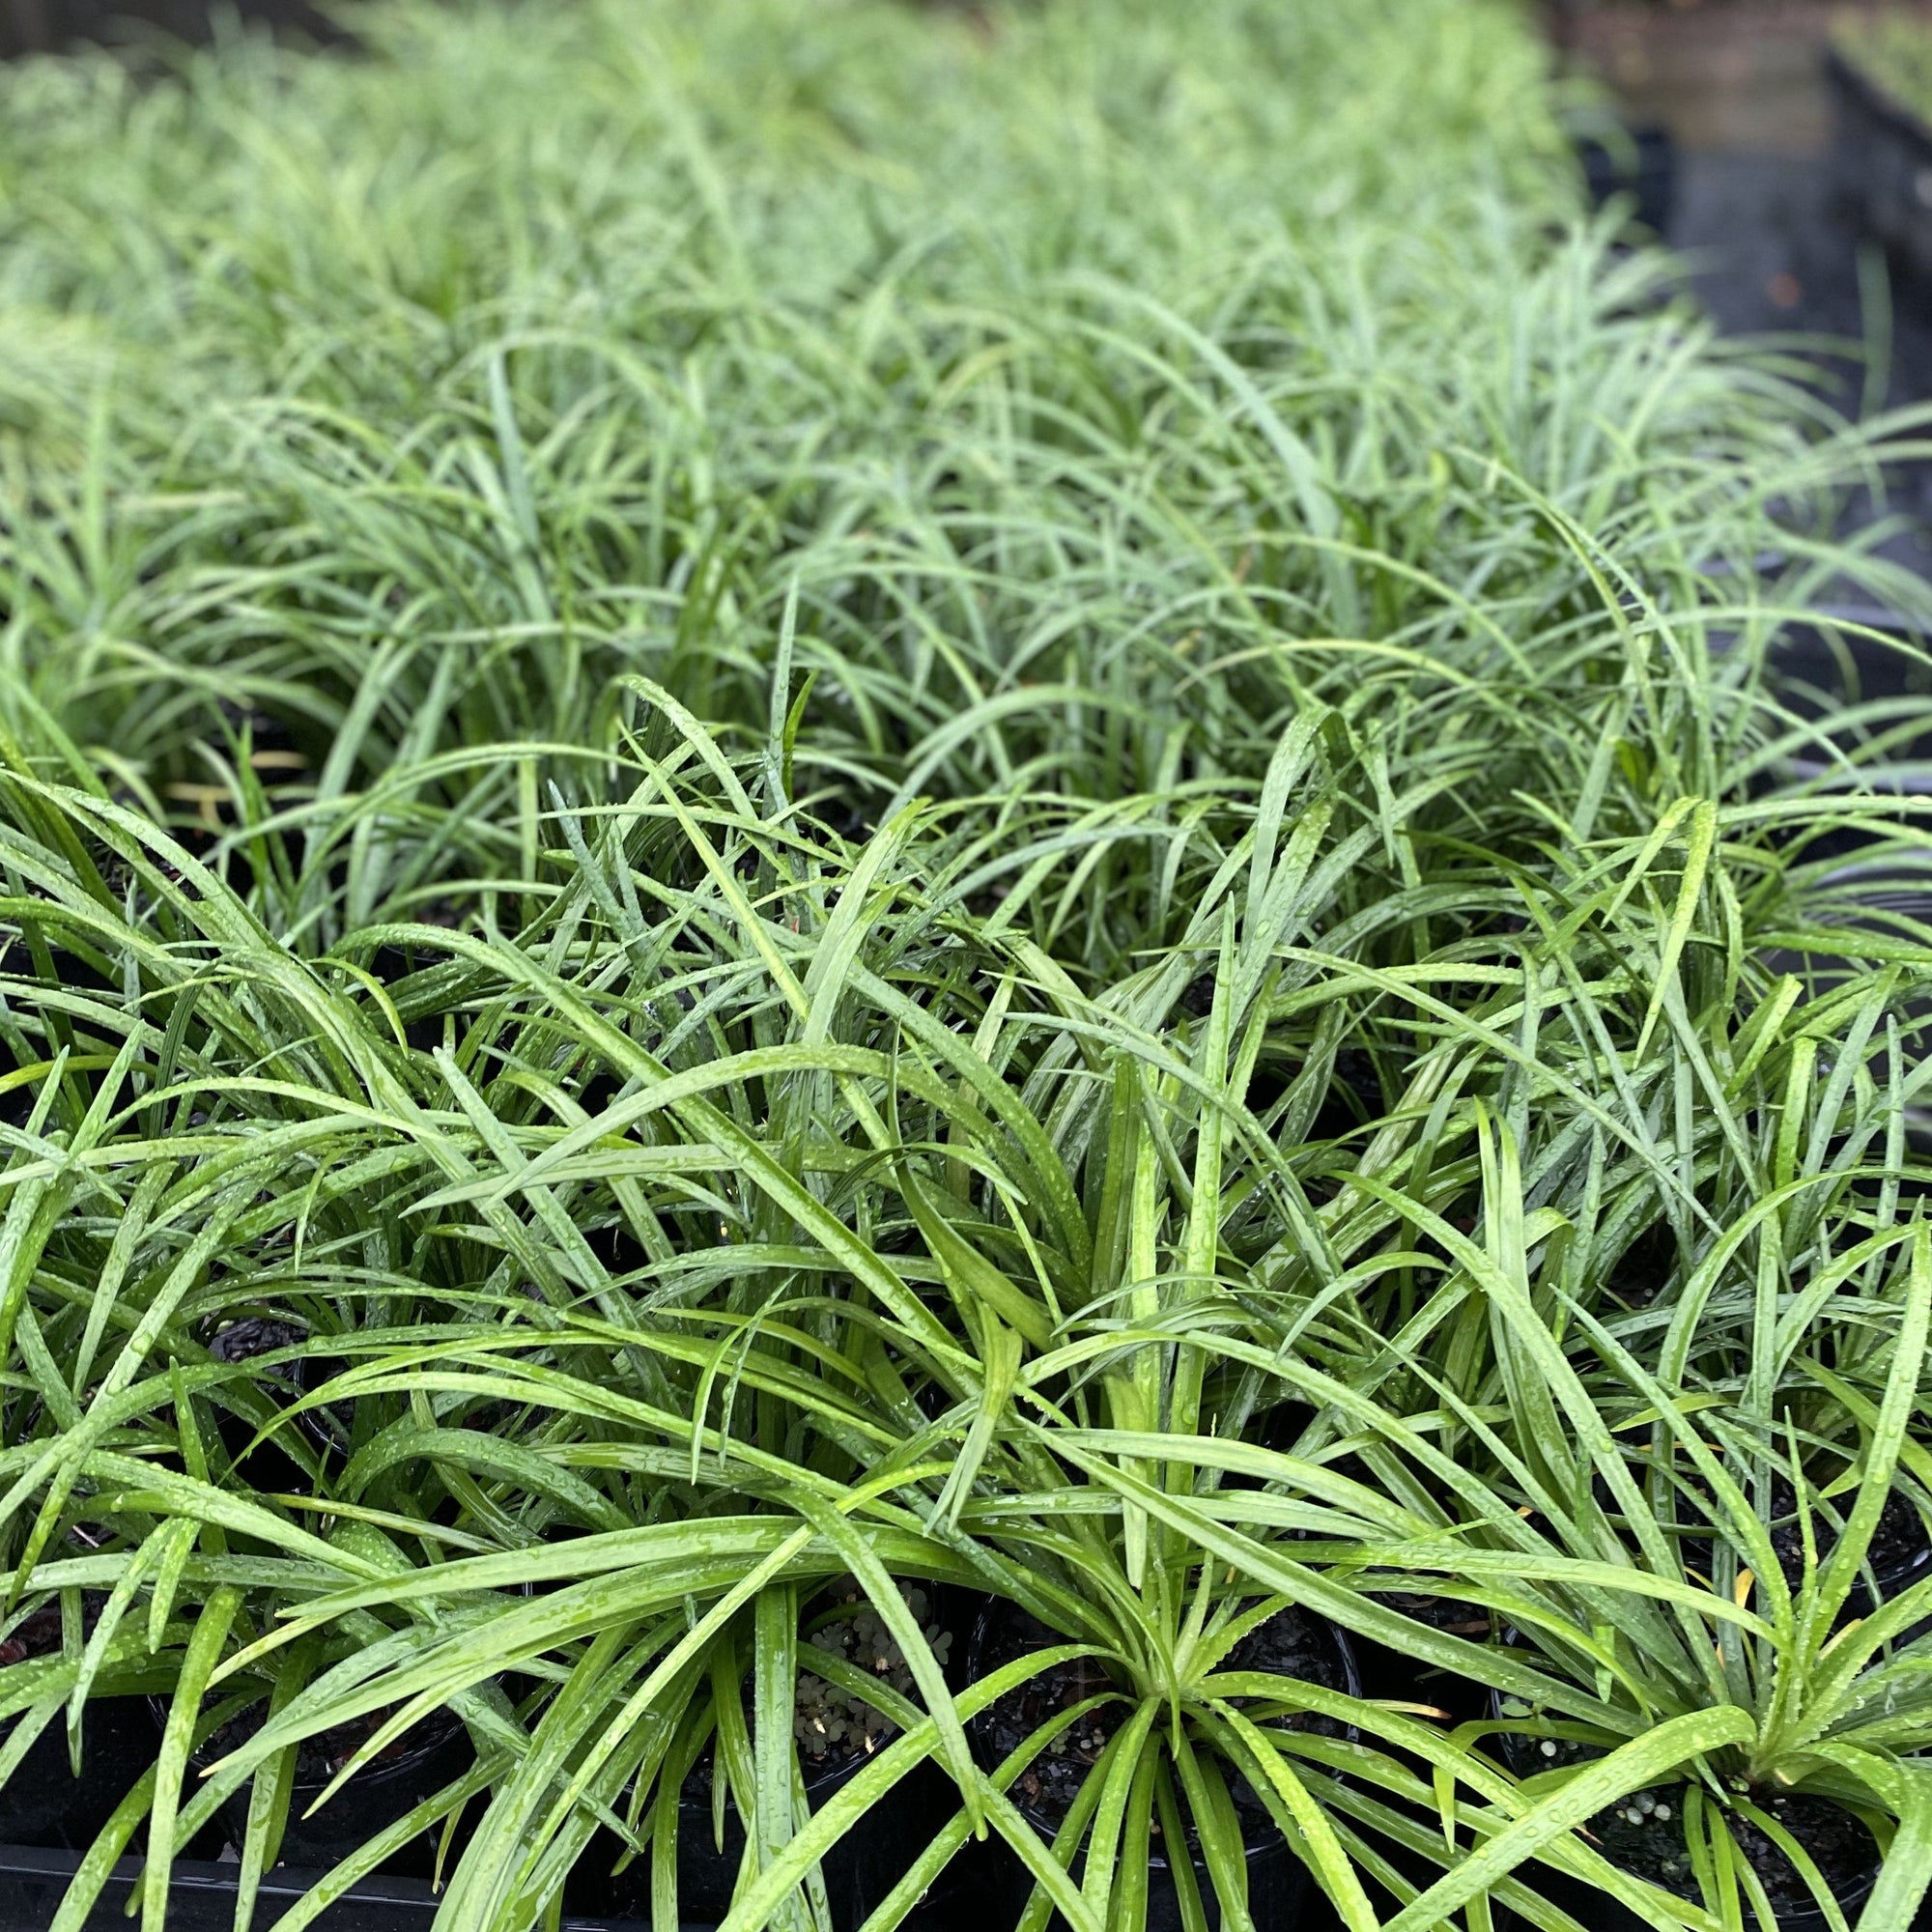 This large perennial makes an attractive, dark green groundcover and is accented with spikes of lilac purple blooms